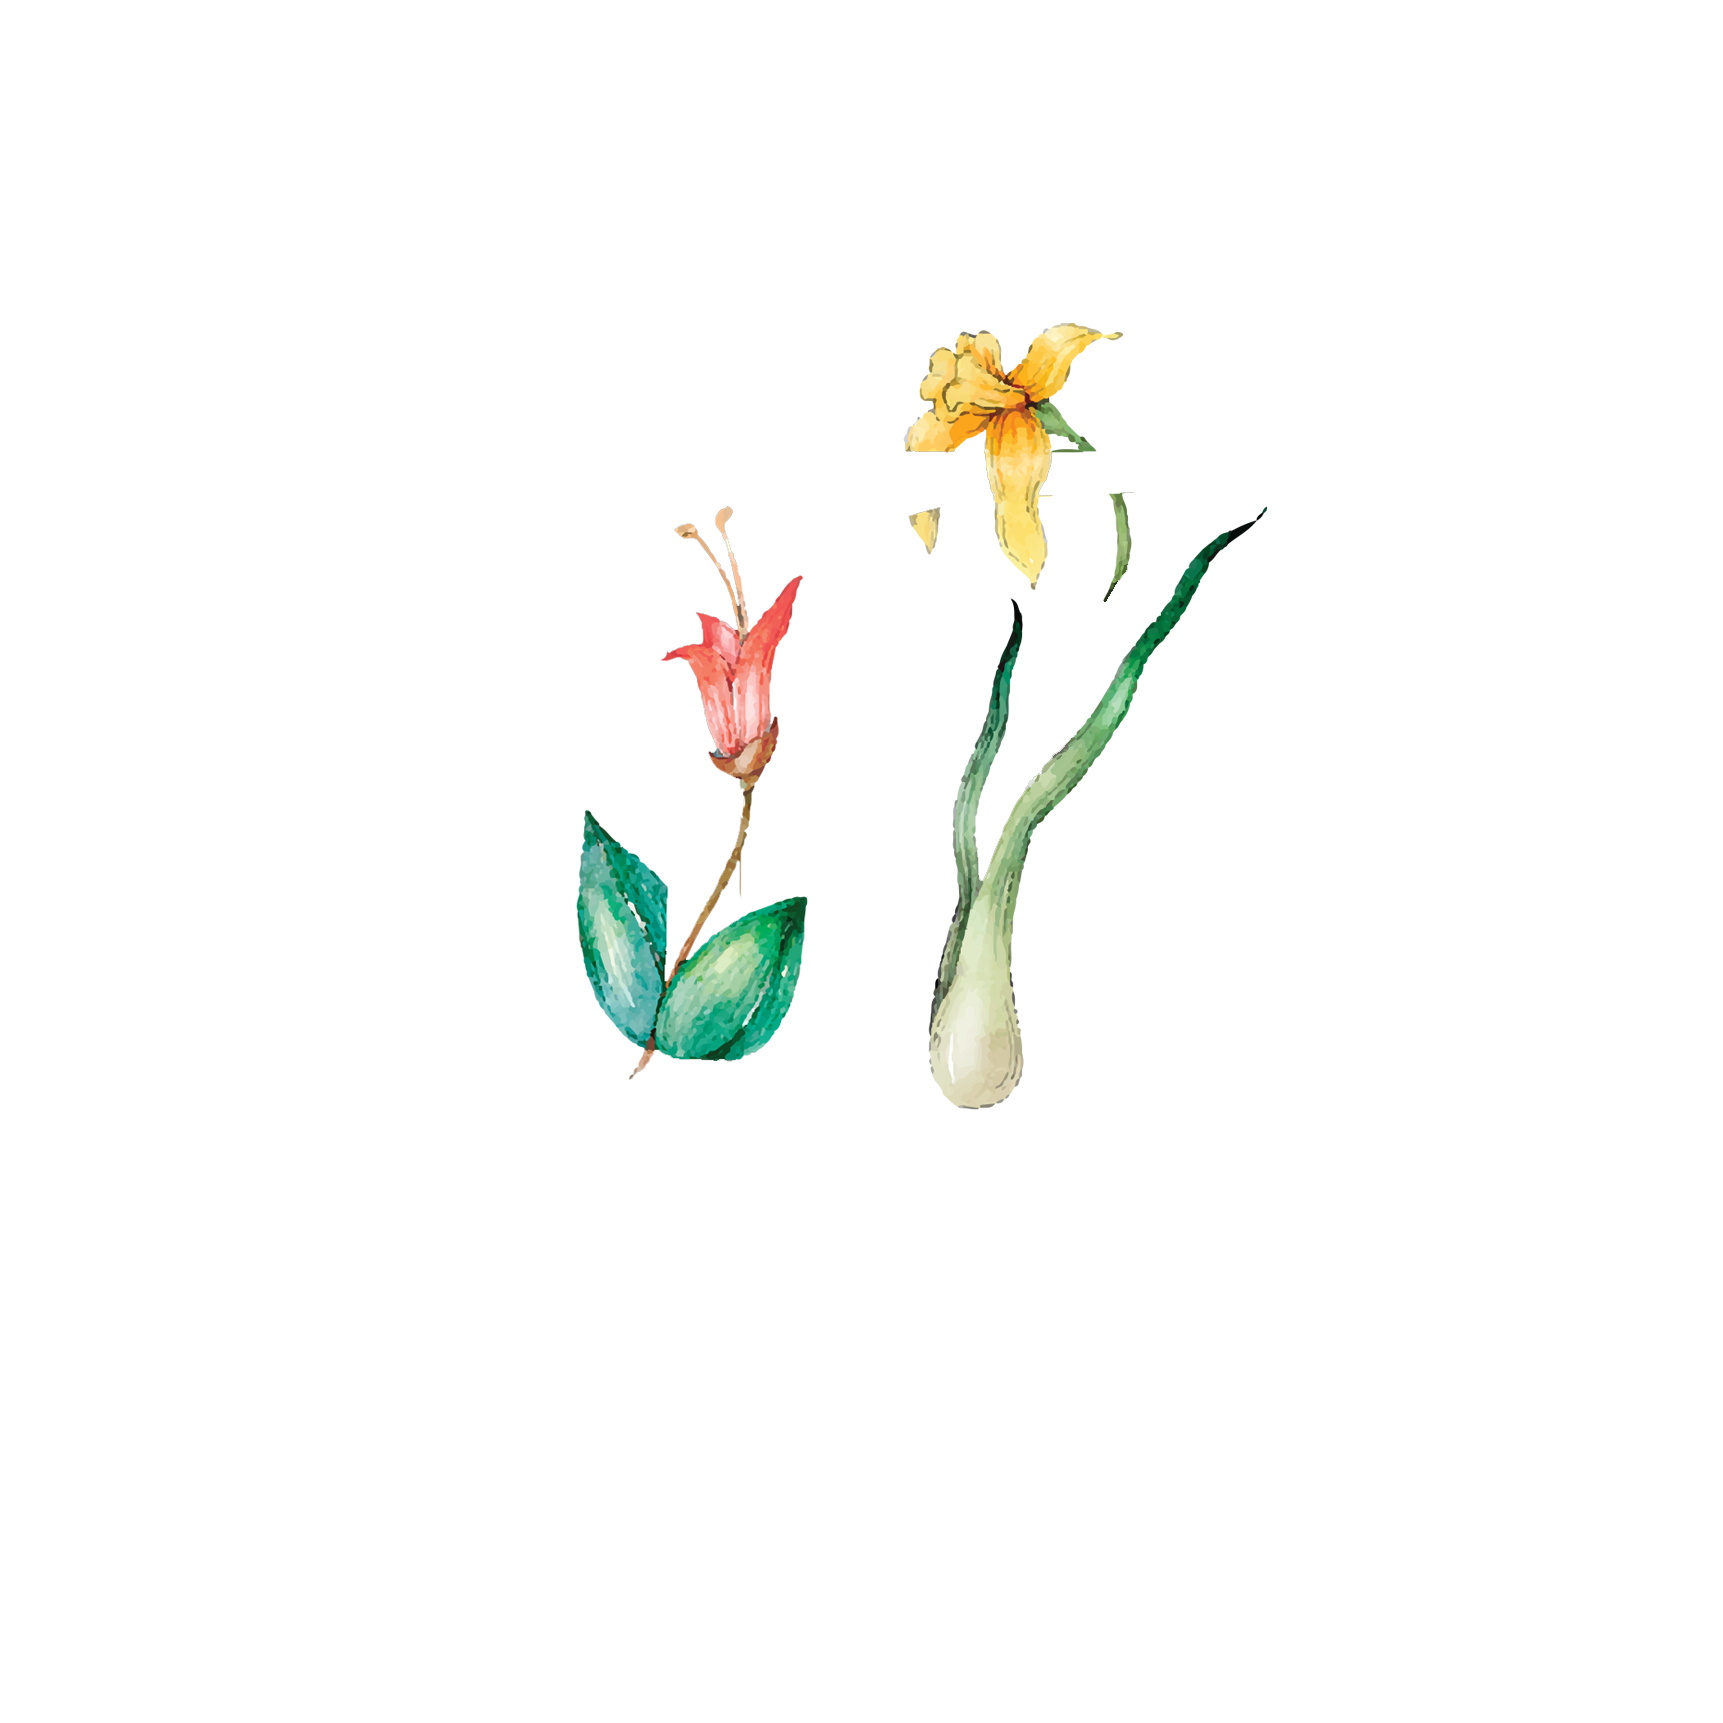 Click to read Day 17 - Kindness